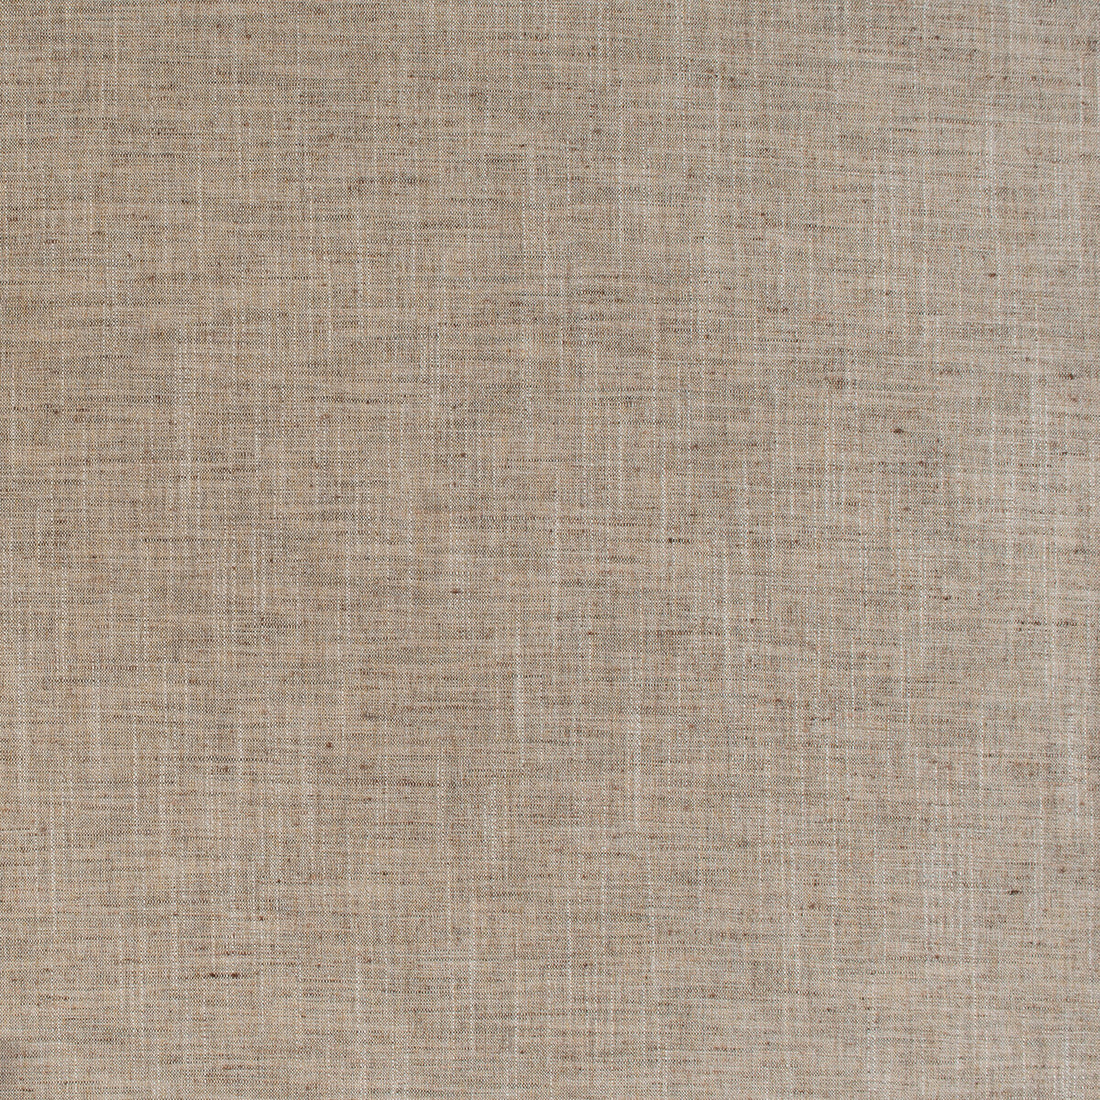 Groundcover fabric in linen color - pattern 35911.16.0 - by Kravet Design in the Barbara Barry Home Midsummer collection